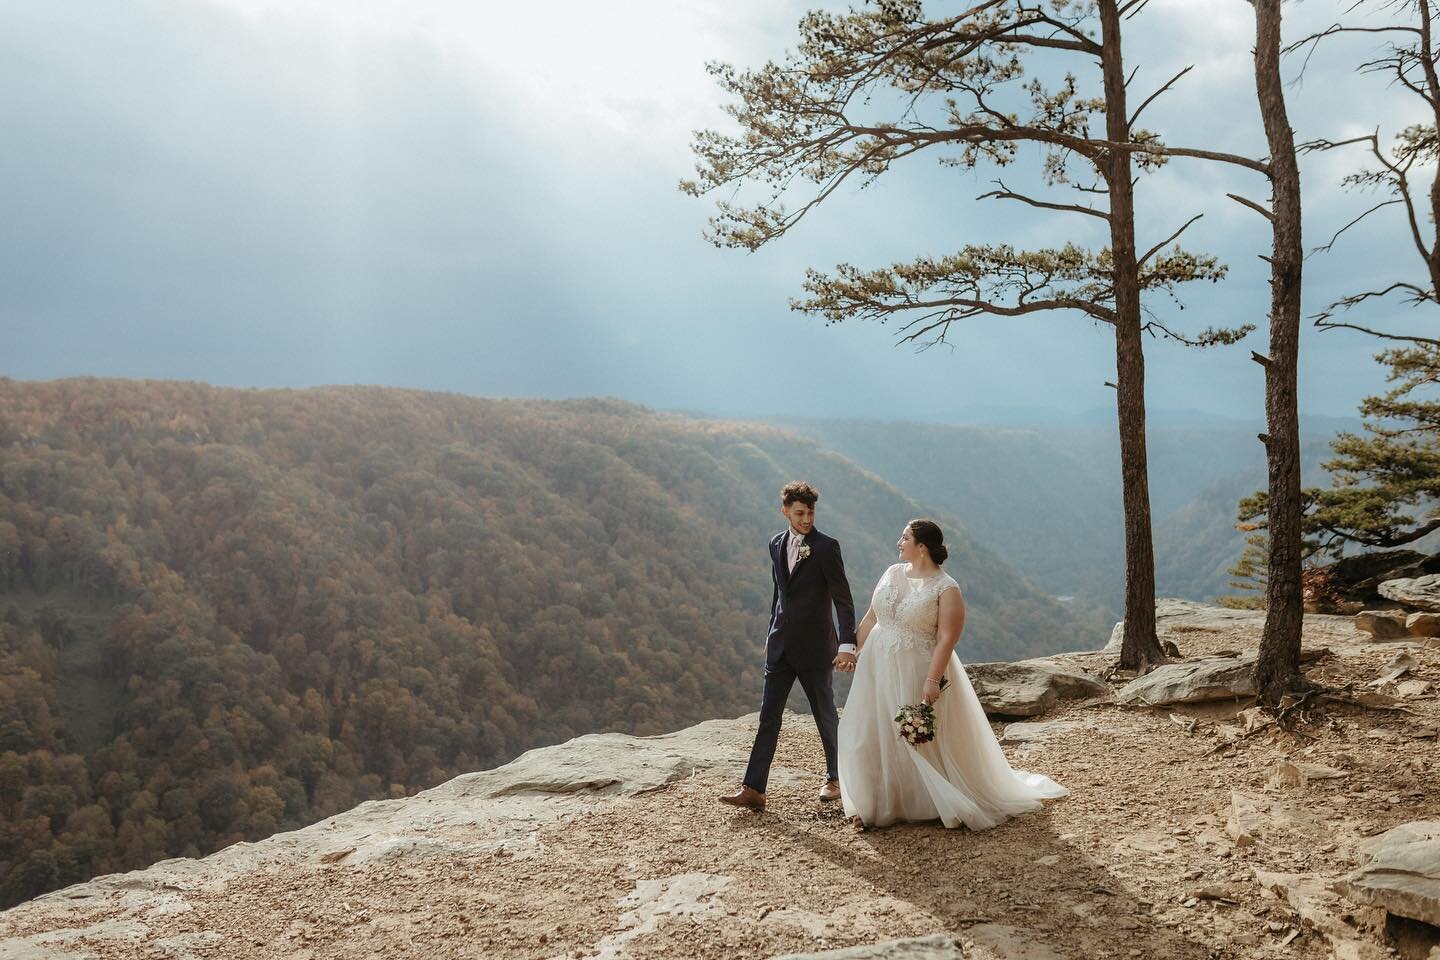 The number one thing we hear when helping couples plan their elopement is the stress of dealing with disappointing family members. 

Our advice is one of two things: invite your parents if they can handle the trail to your ceremony spot, or keep it p